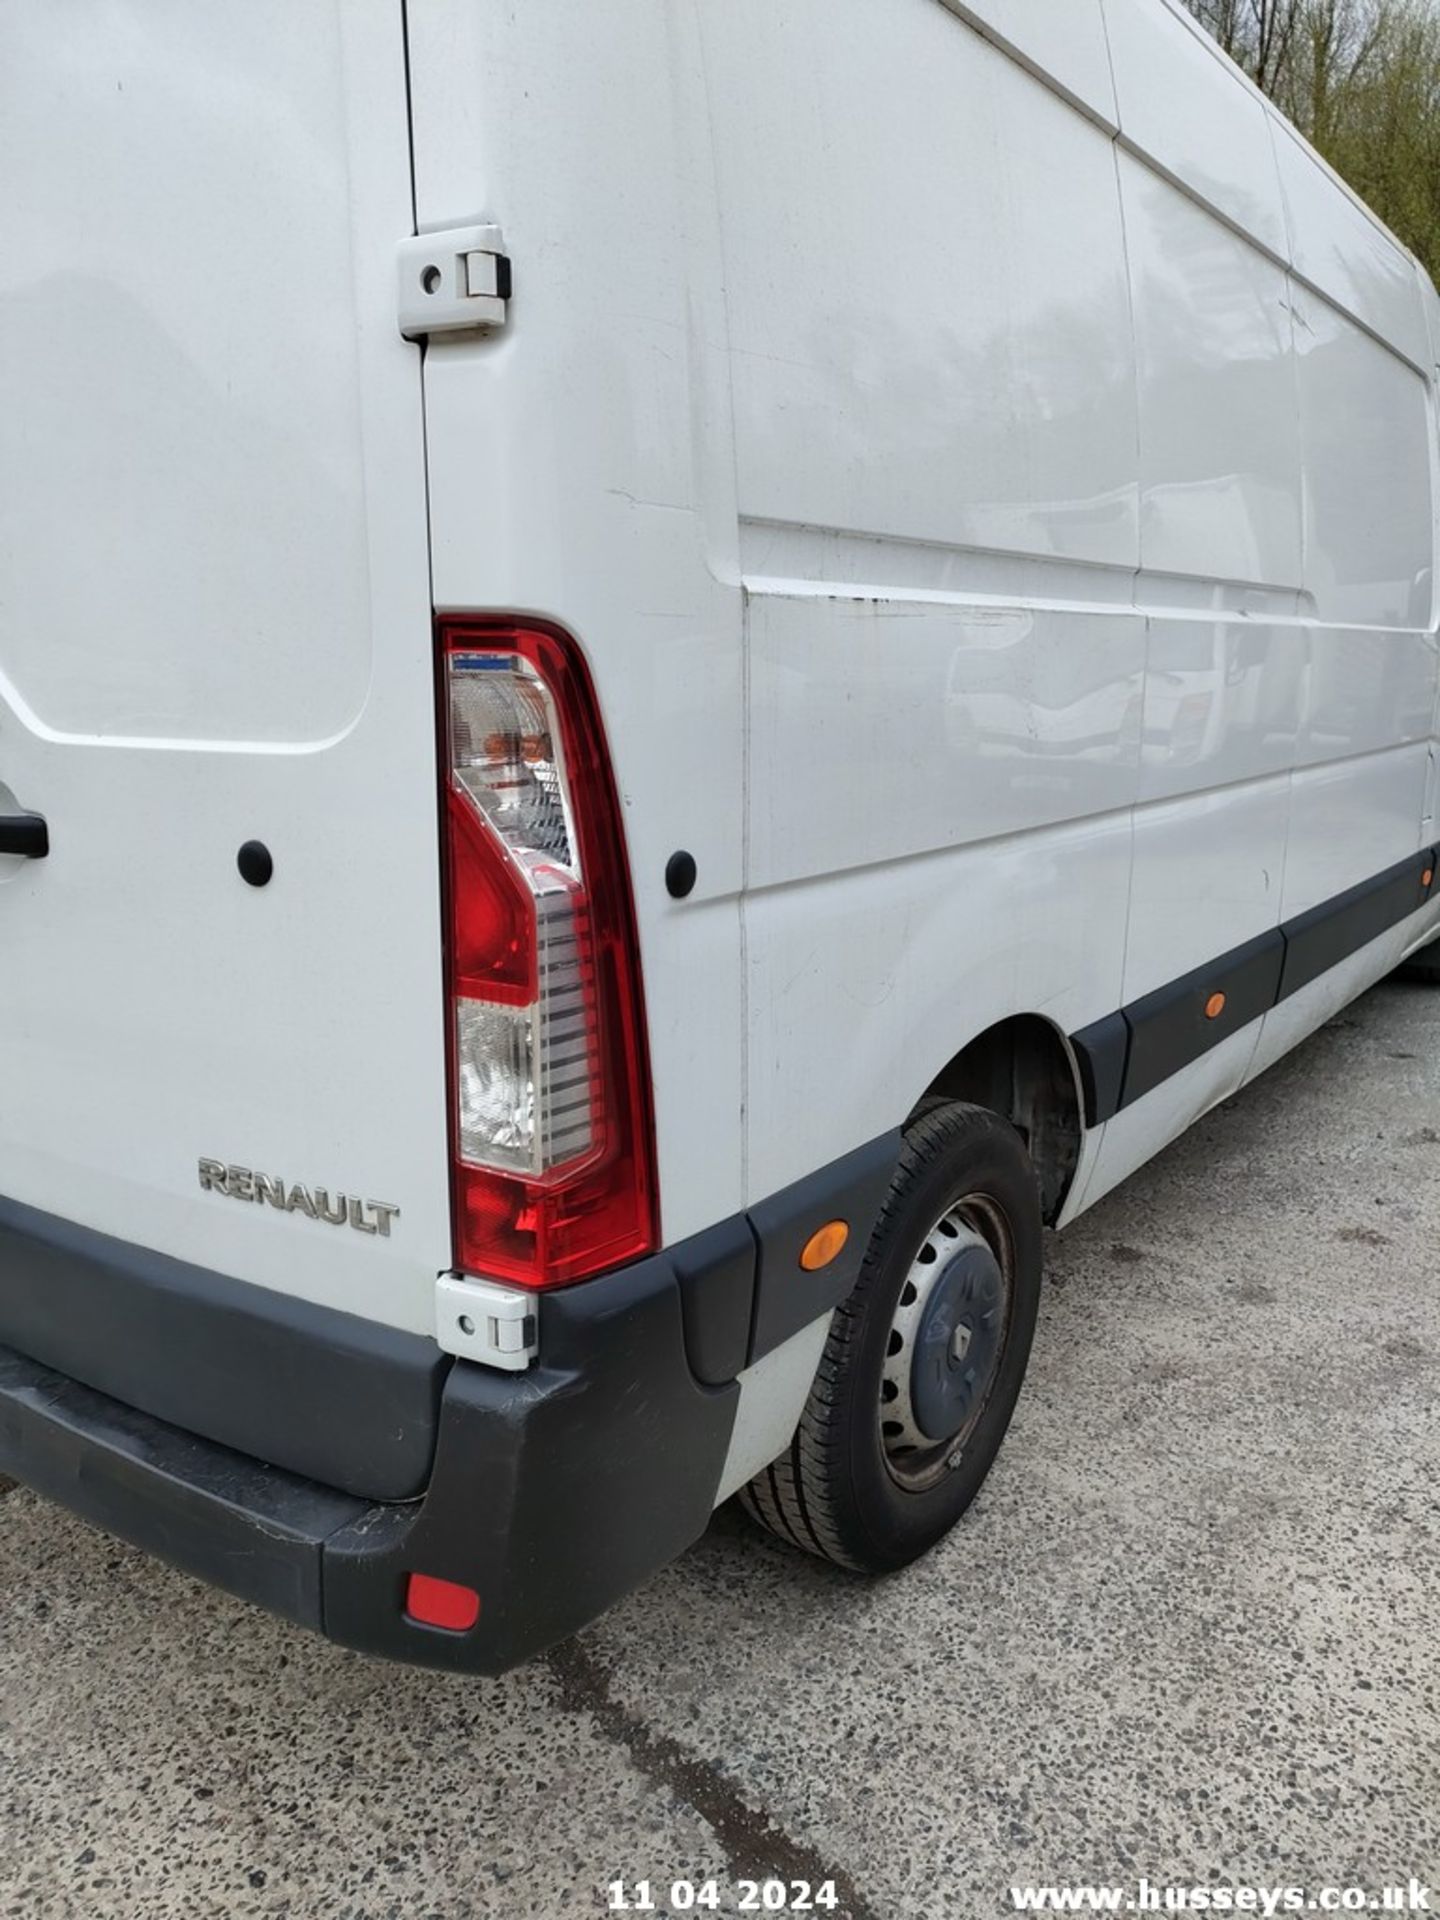 18/68 RENAULT MASTER LM35 BUSINESS DCI - 2298cc 5dr Van (White) - Image 41 of 68